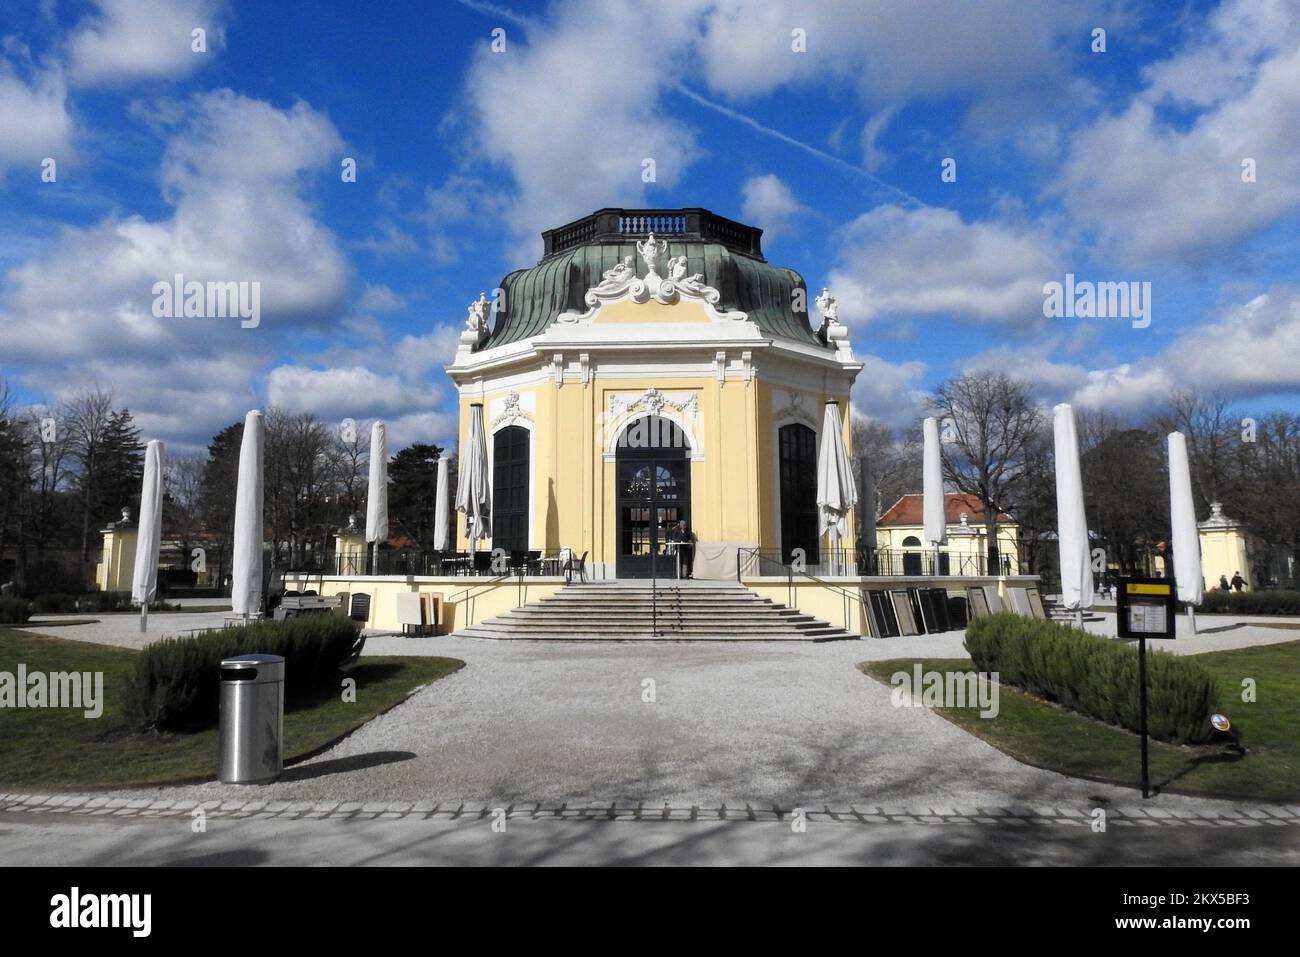 13.03.2018., Vienna, Austria - Tiergarten Schonbrunn, or 'Vienna Zoo', is a zoo located on the grounds of the famous Schonbrunn Palace in Vienna, Austria. Founded as an imperial menagerie in 1752, it is the oldest continuously operating zoo in the world. Photo: Borna Filic/PIXSELL  Stock Photo